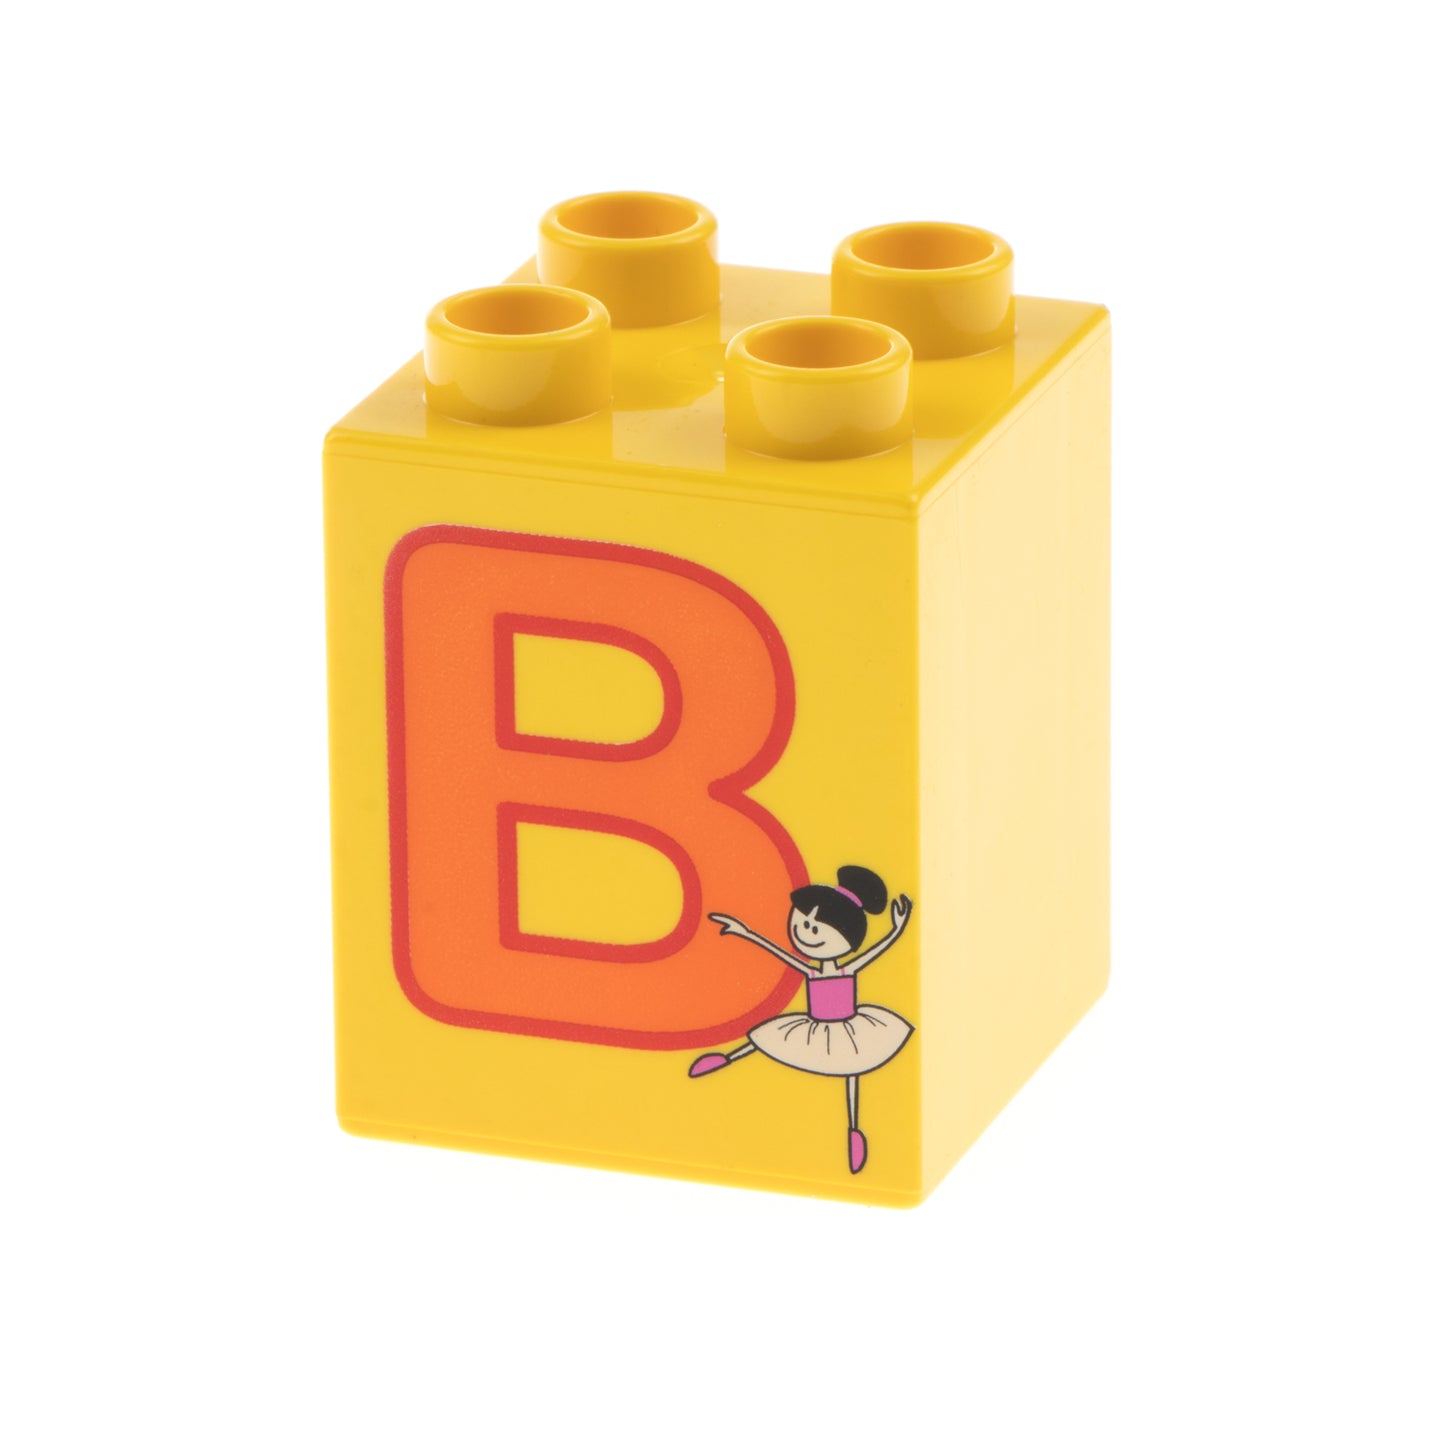 Part 31110pb044 LEGO Duplo, Brick 2 x 2 x 2 with Letter B and Ballerina Pattern - USADO